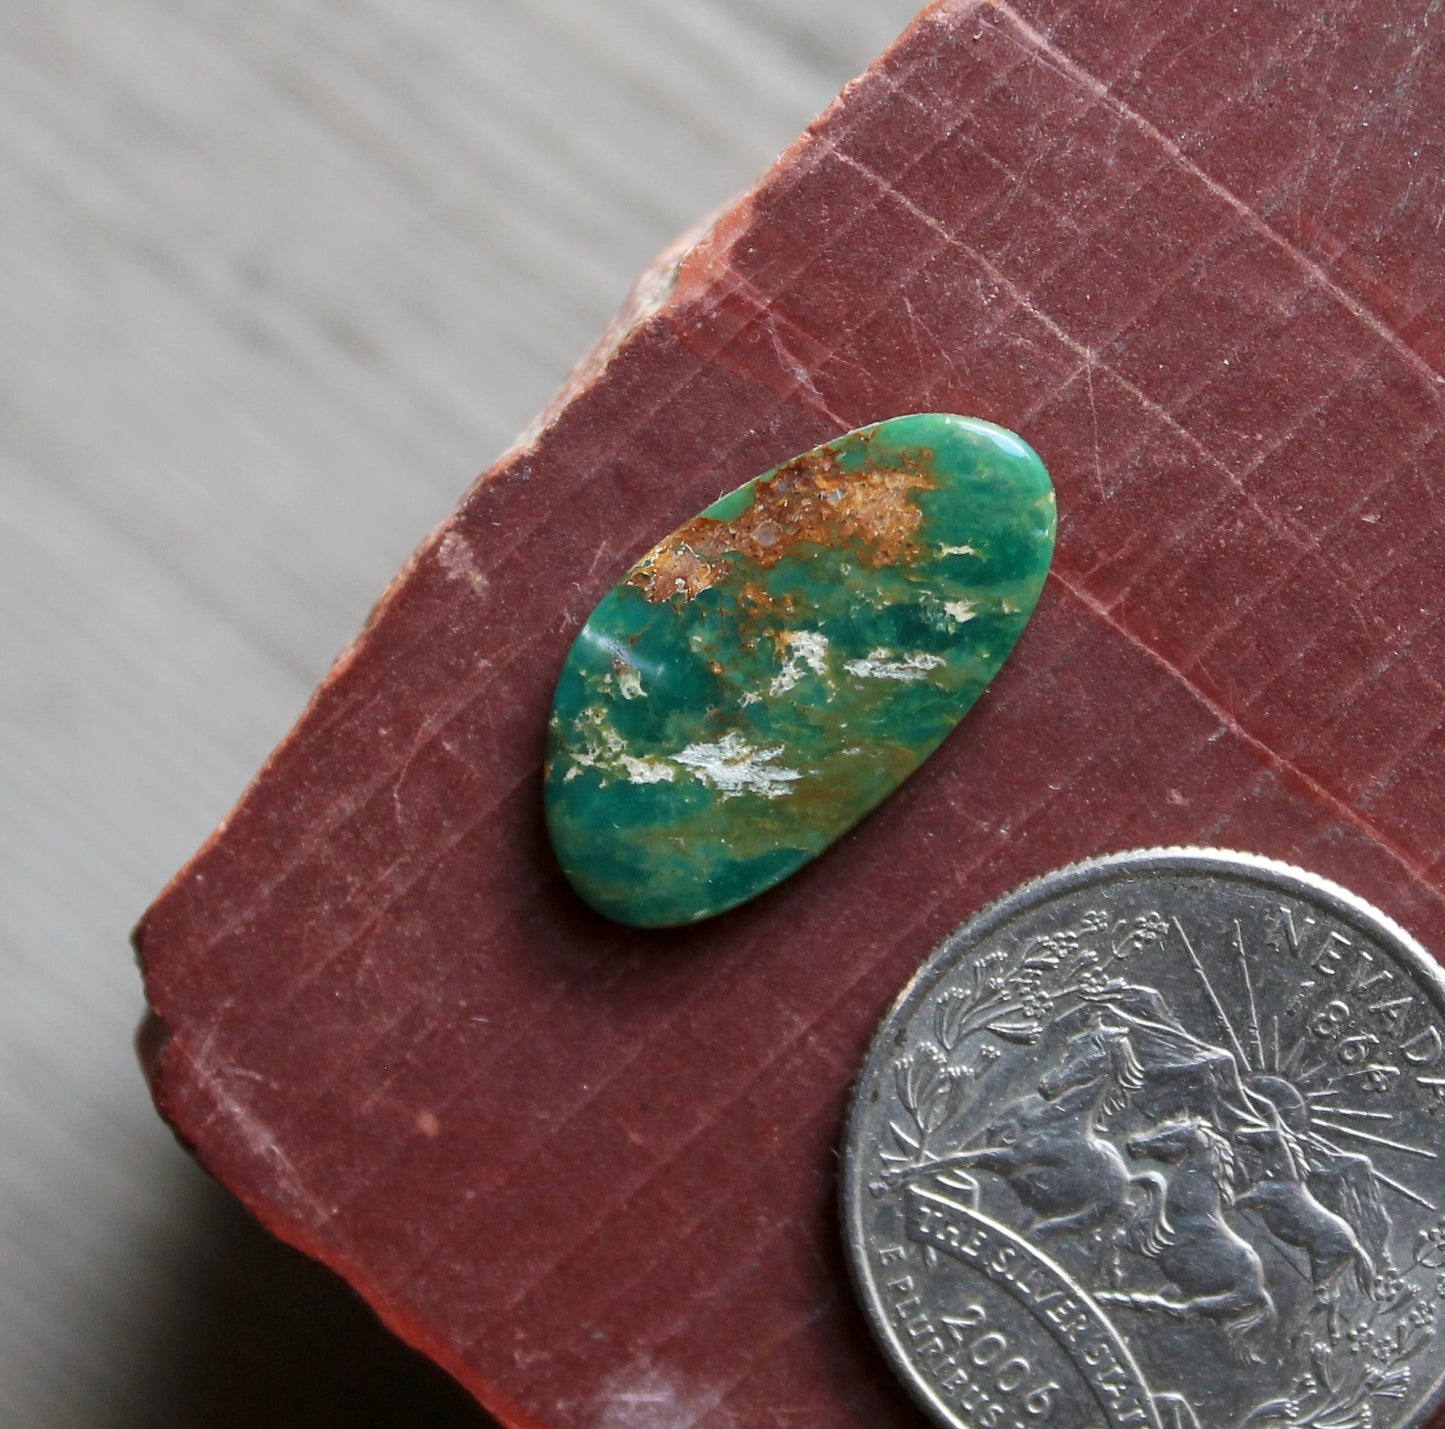 7 carat green Stone Mountain Turquoise cabochon with red matrix